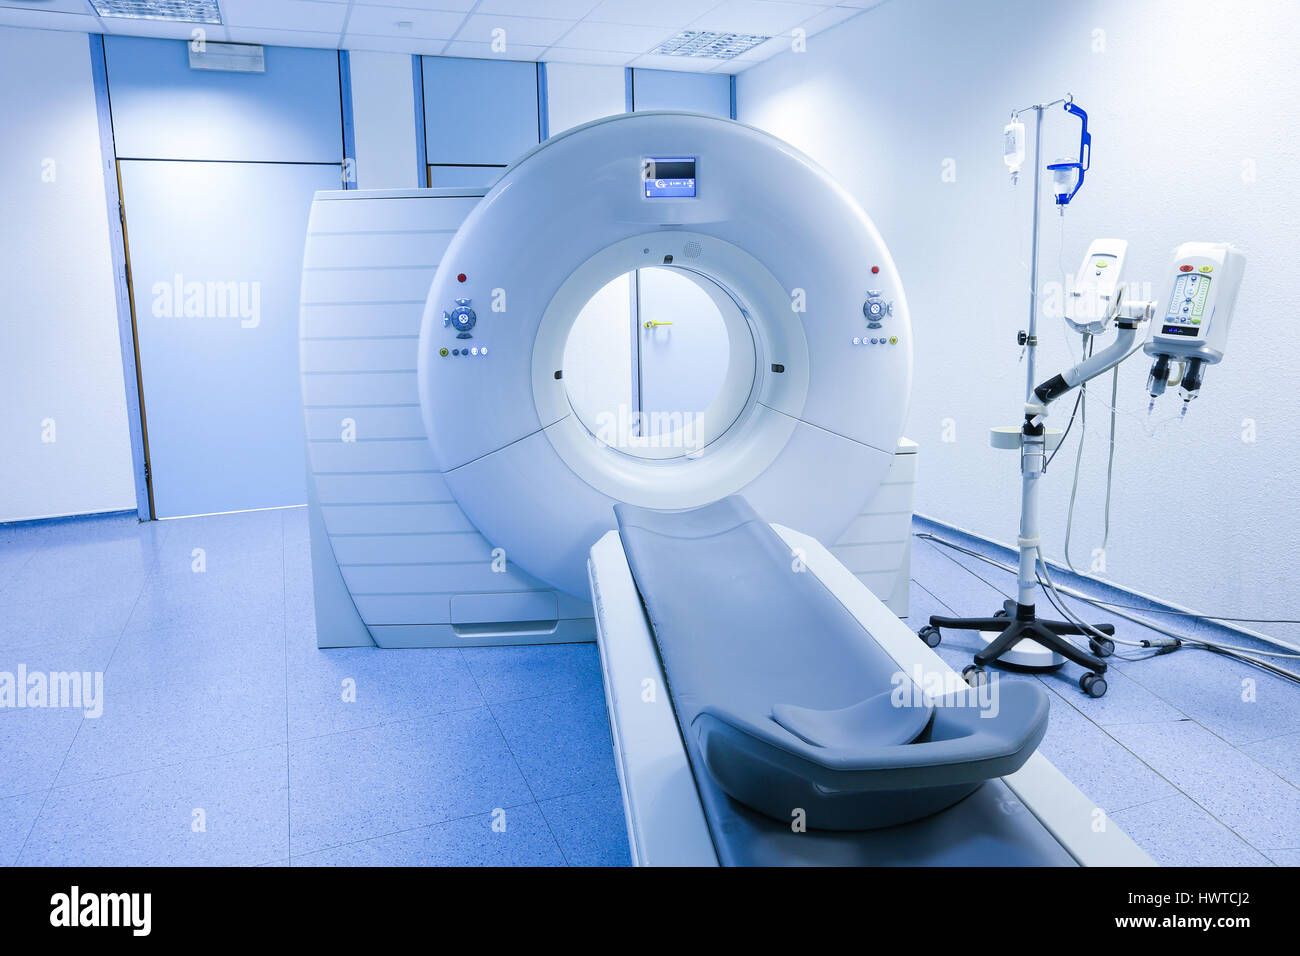 CT (Computed tomography) scanner in hospital laboratory. Health care, medical technology, hi-tech equipment and diagnosis concept with copy space. Stock Photo